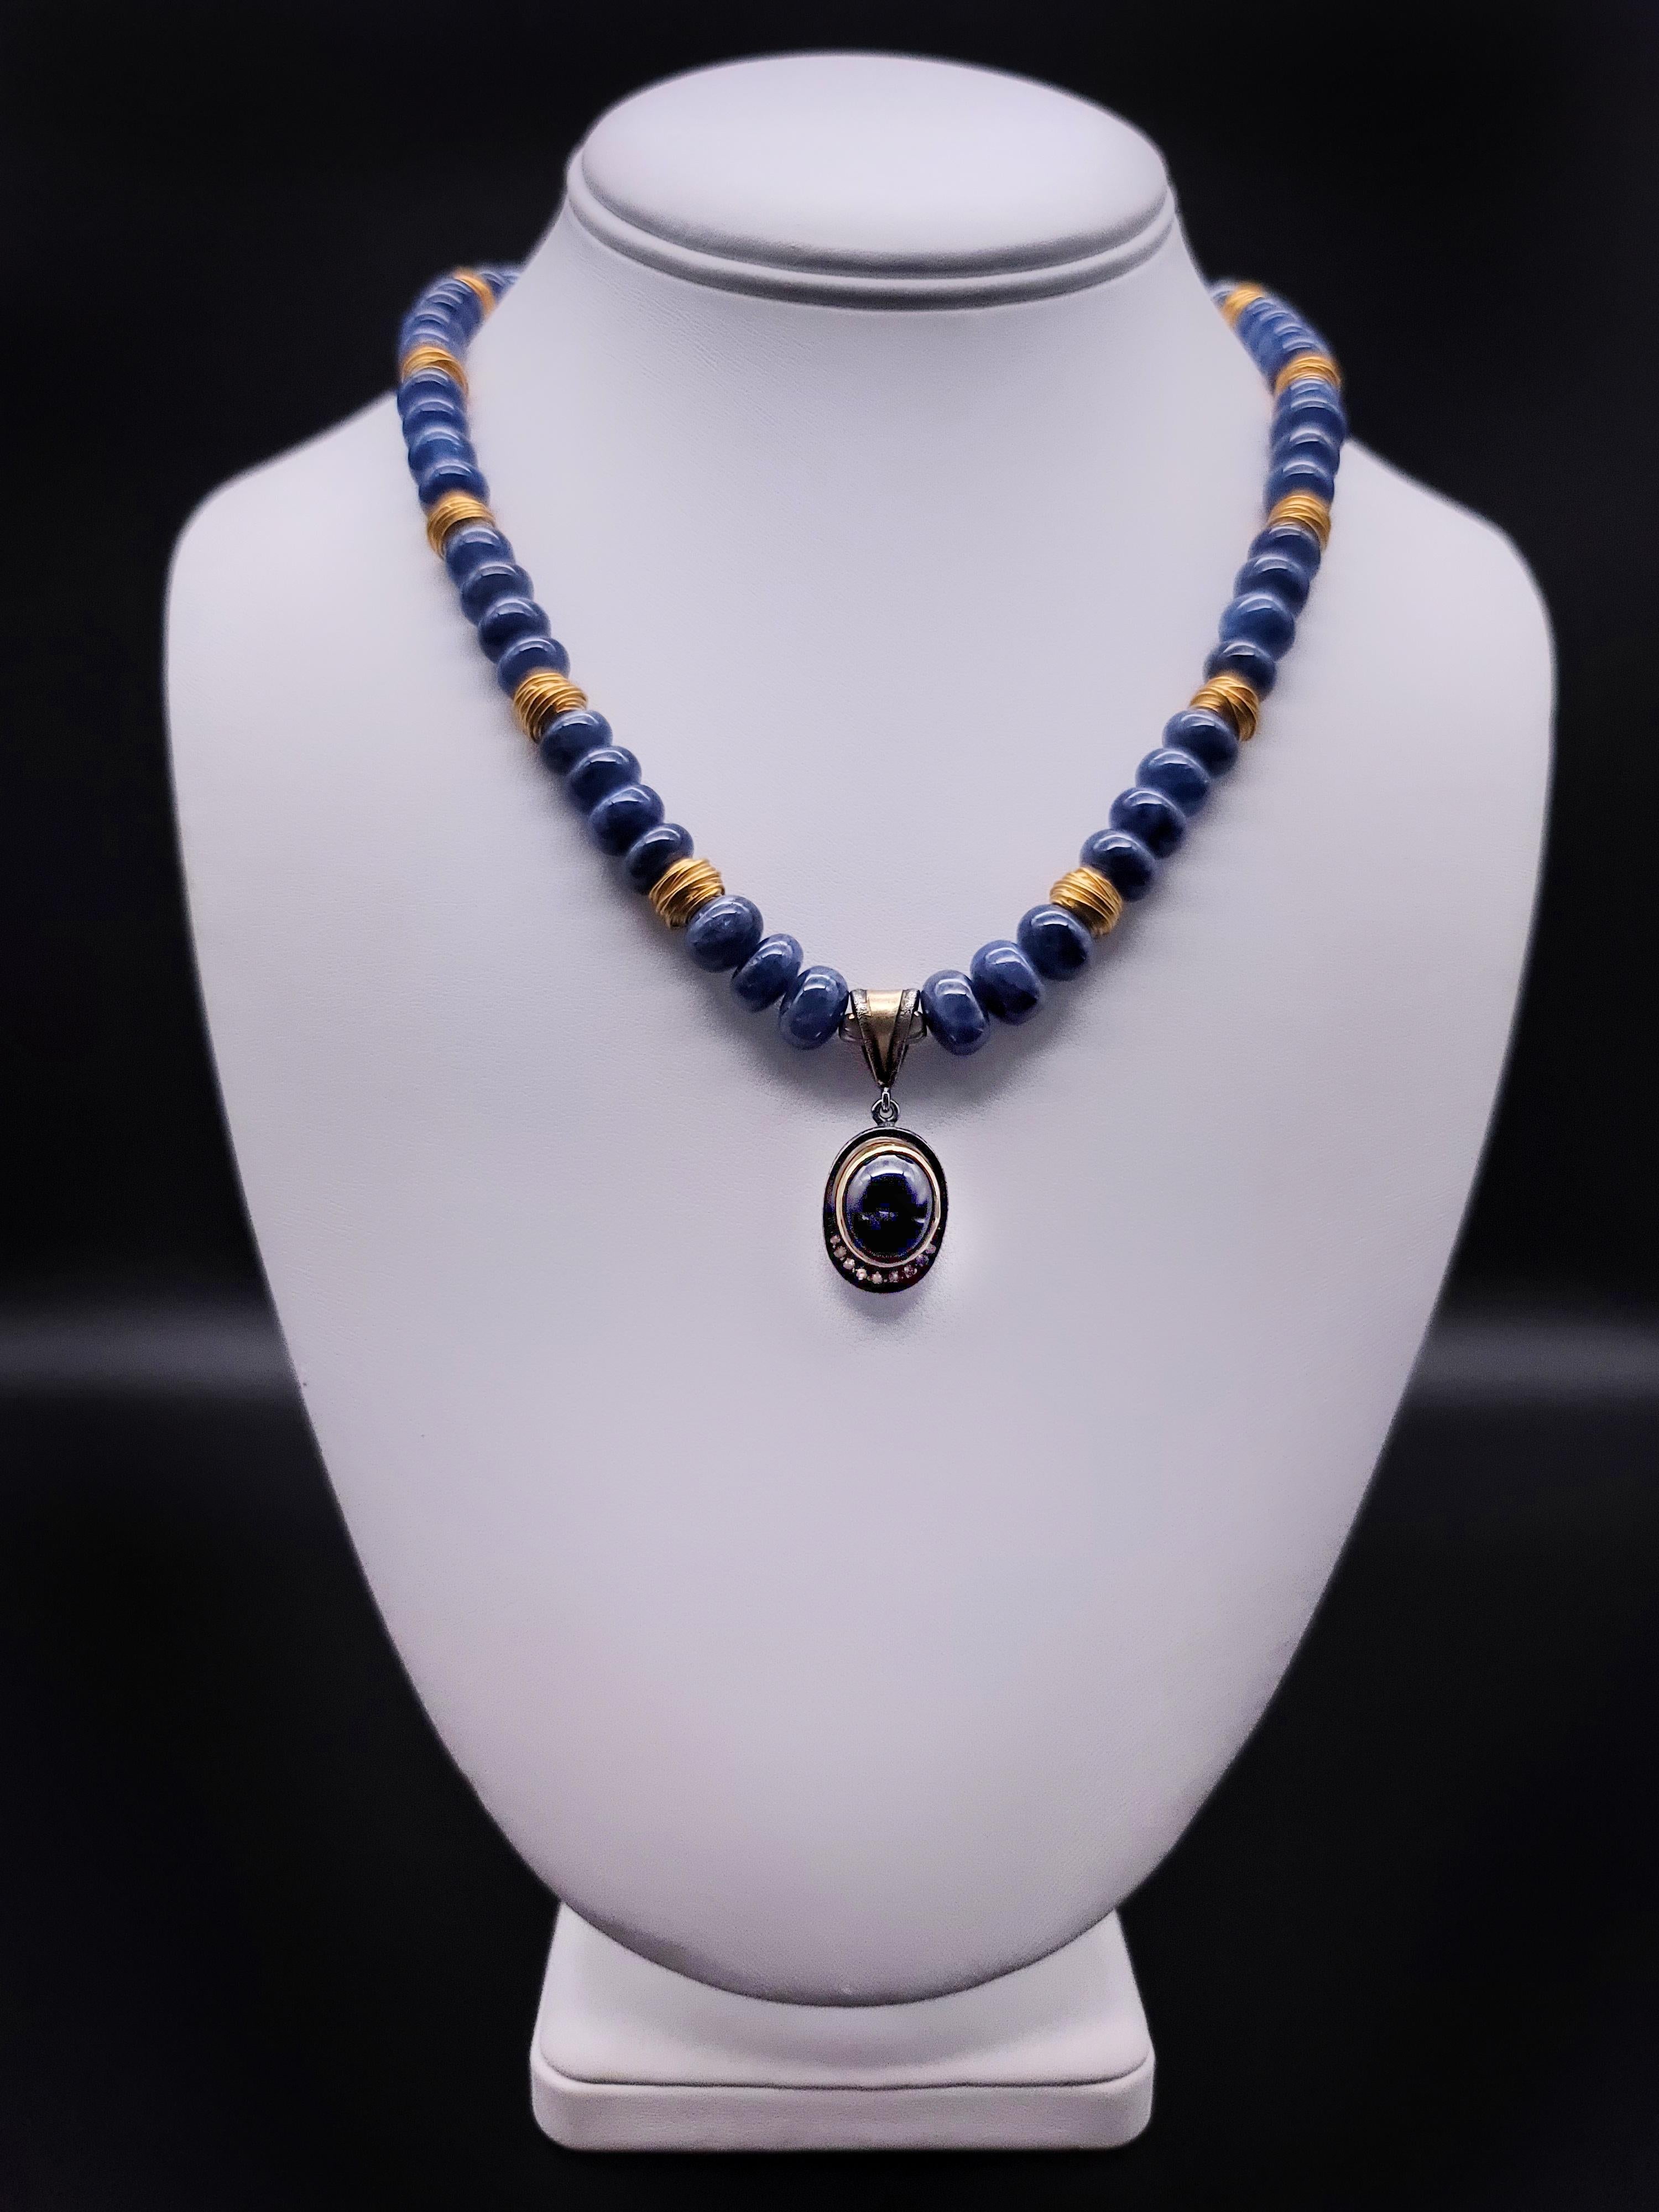 One-of-a-Kind

Introducing our one-of-a-kind Royal Blue Sapphire necklace, a true treasure for the ages. Revered for centuries by kings, emperors, and even duchesses, this gemstone's striking royal blue hue exudes luxury and refinement.

Each stone